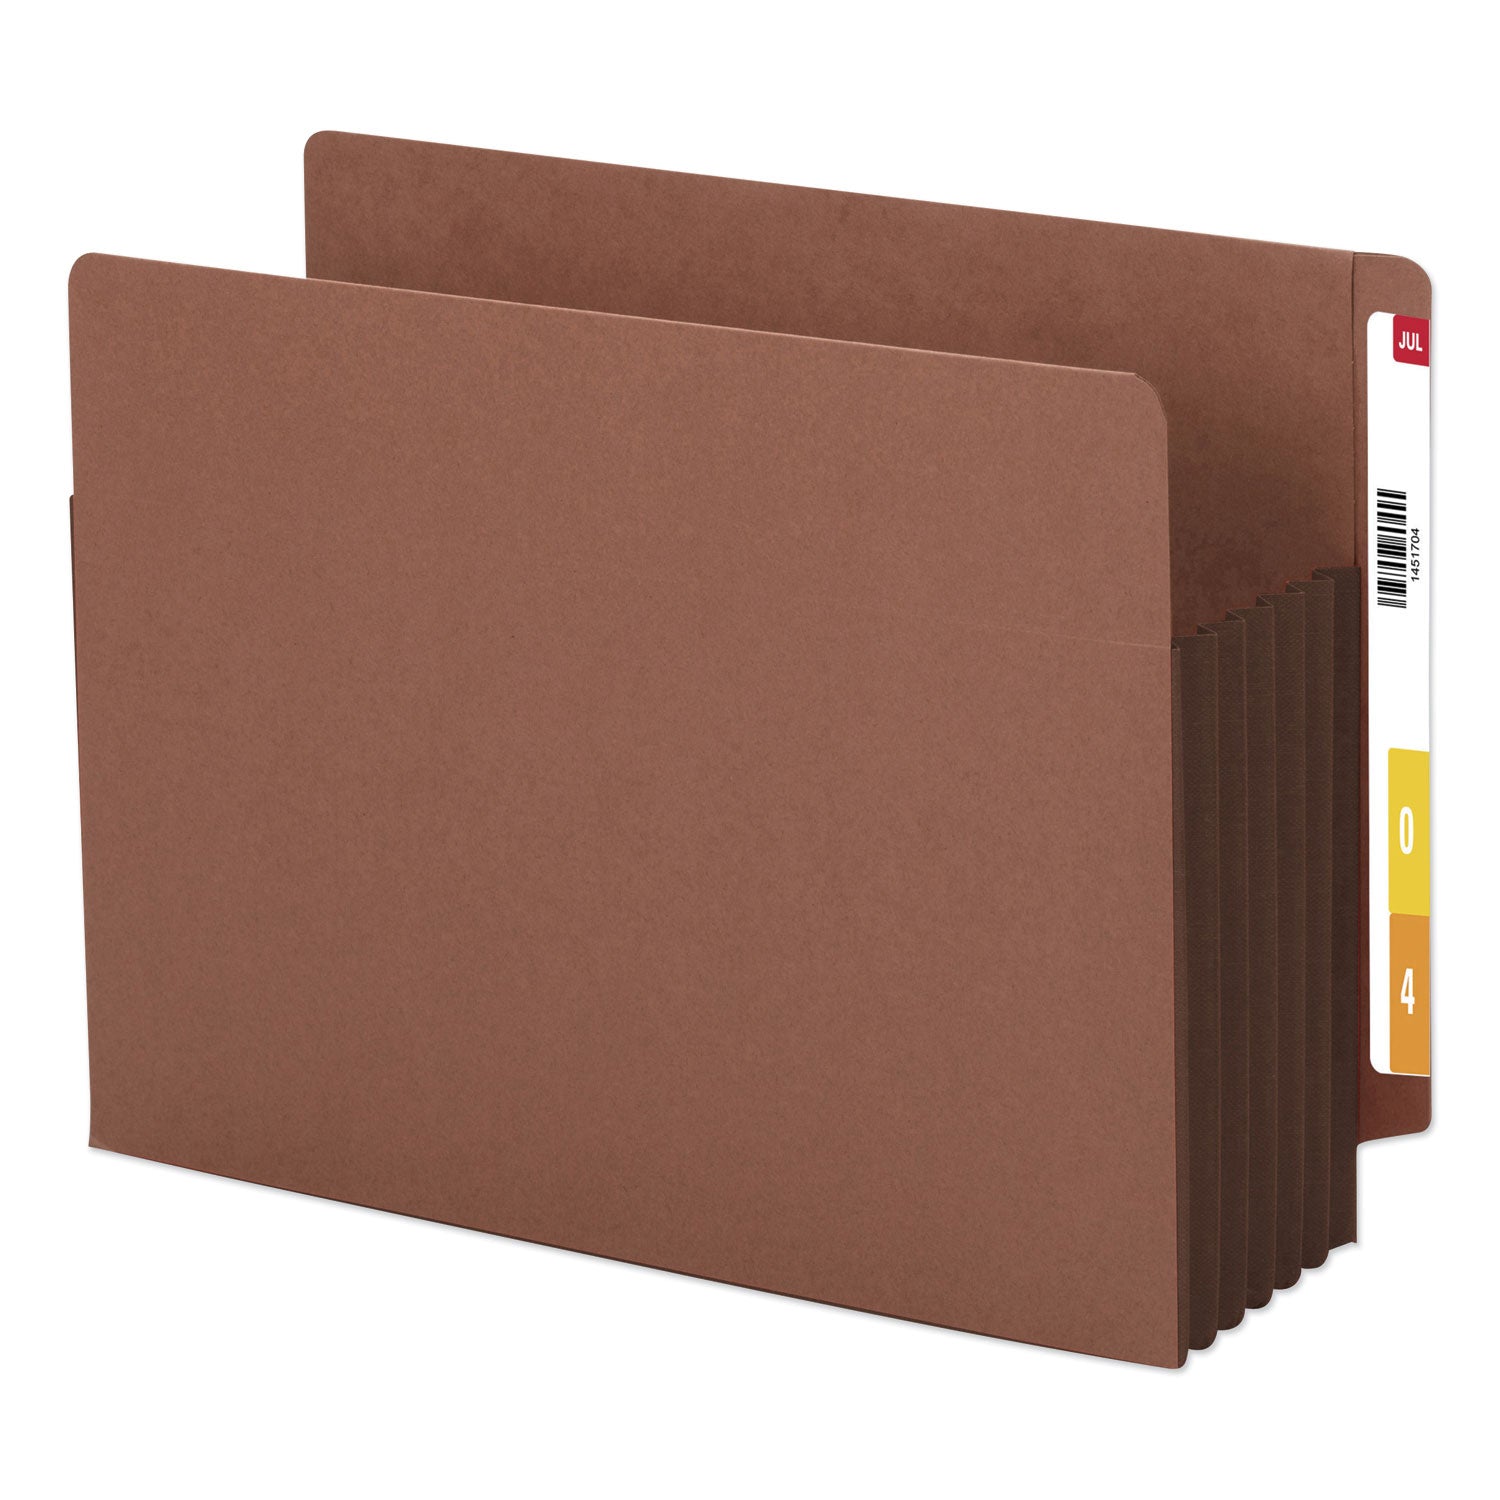 Redrope Drop-Front End Tab File Pockets, Fully Lined Colored Gussets, 5.25" Expansion, Letter Size, Redrope/Brown, 10/Box - 